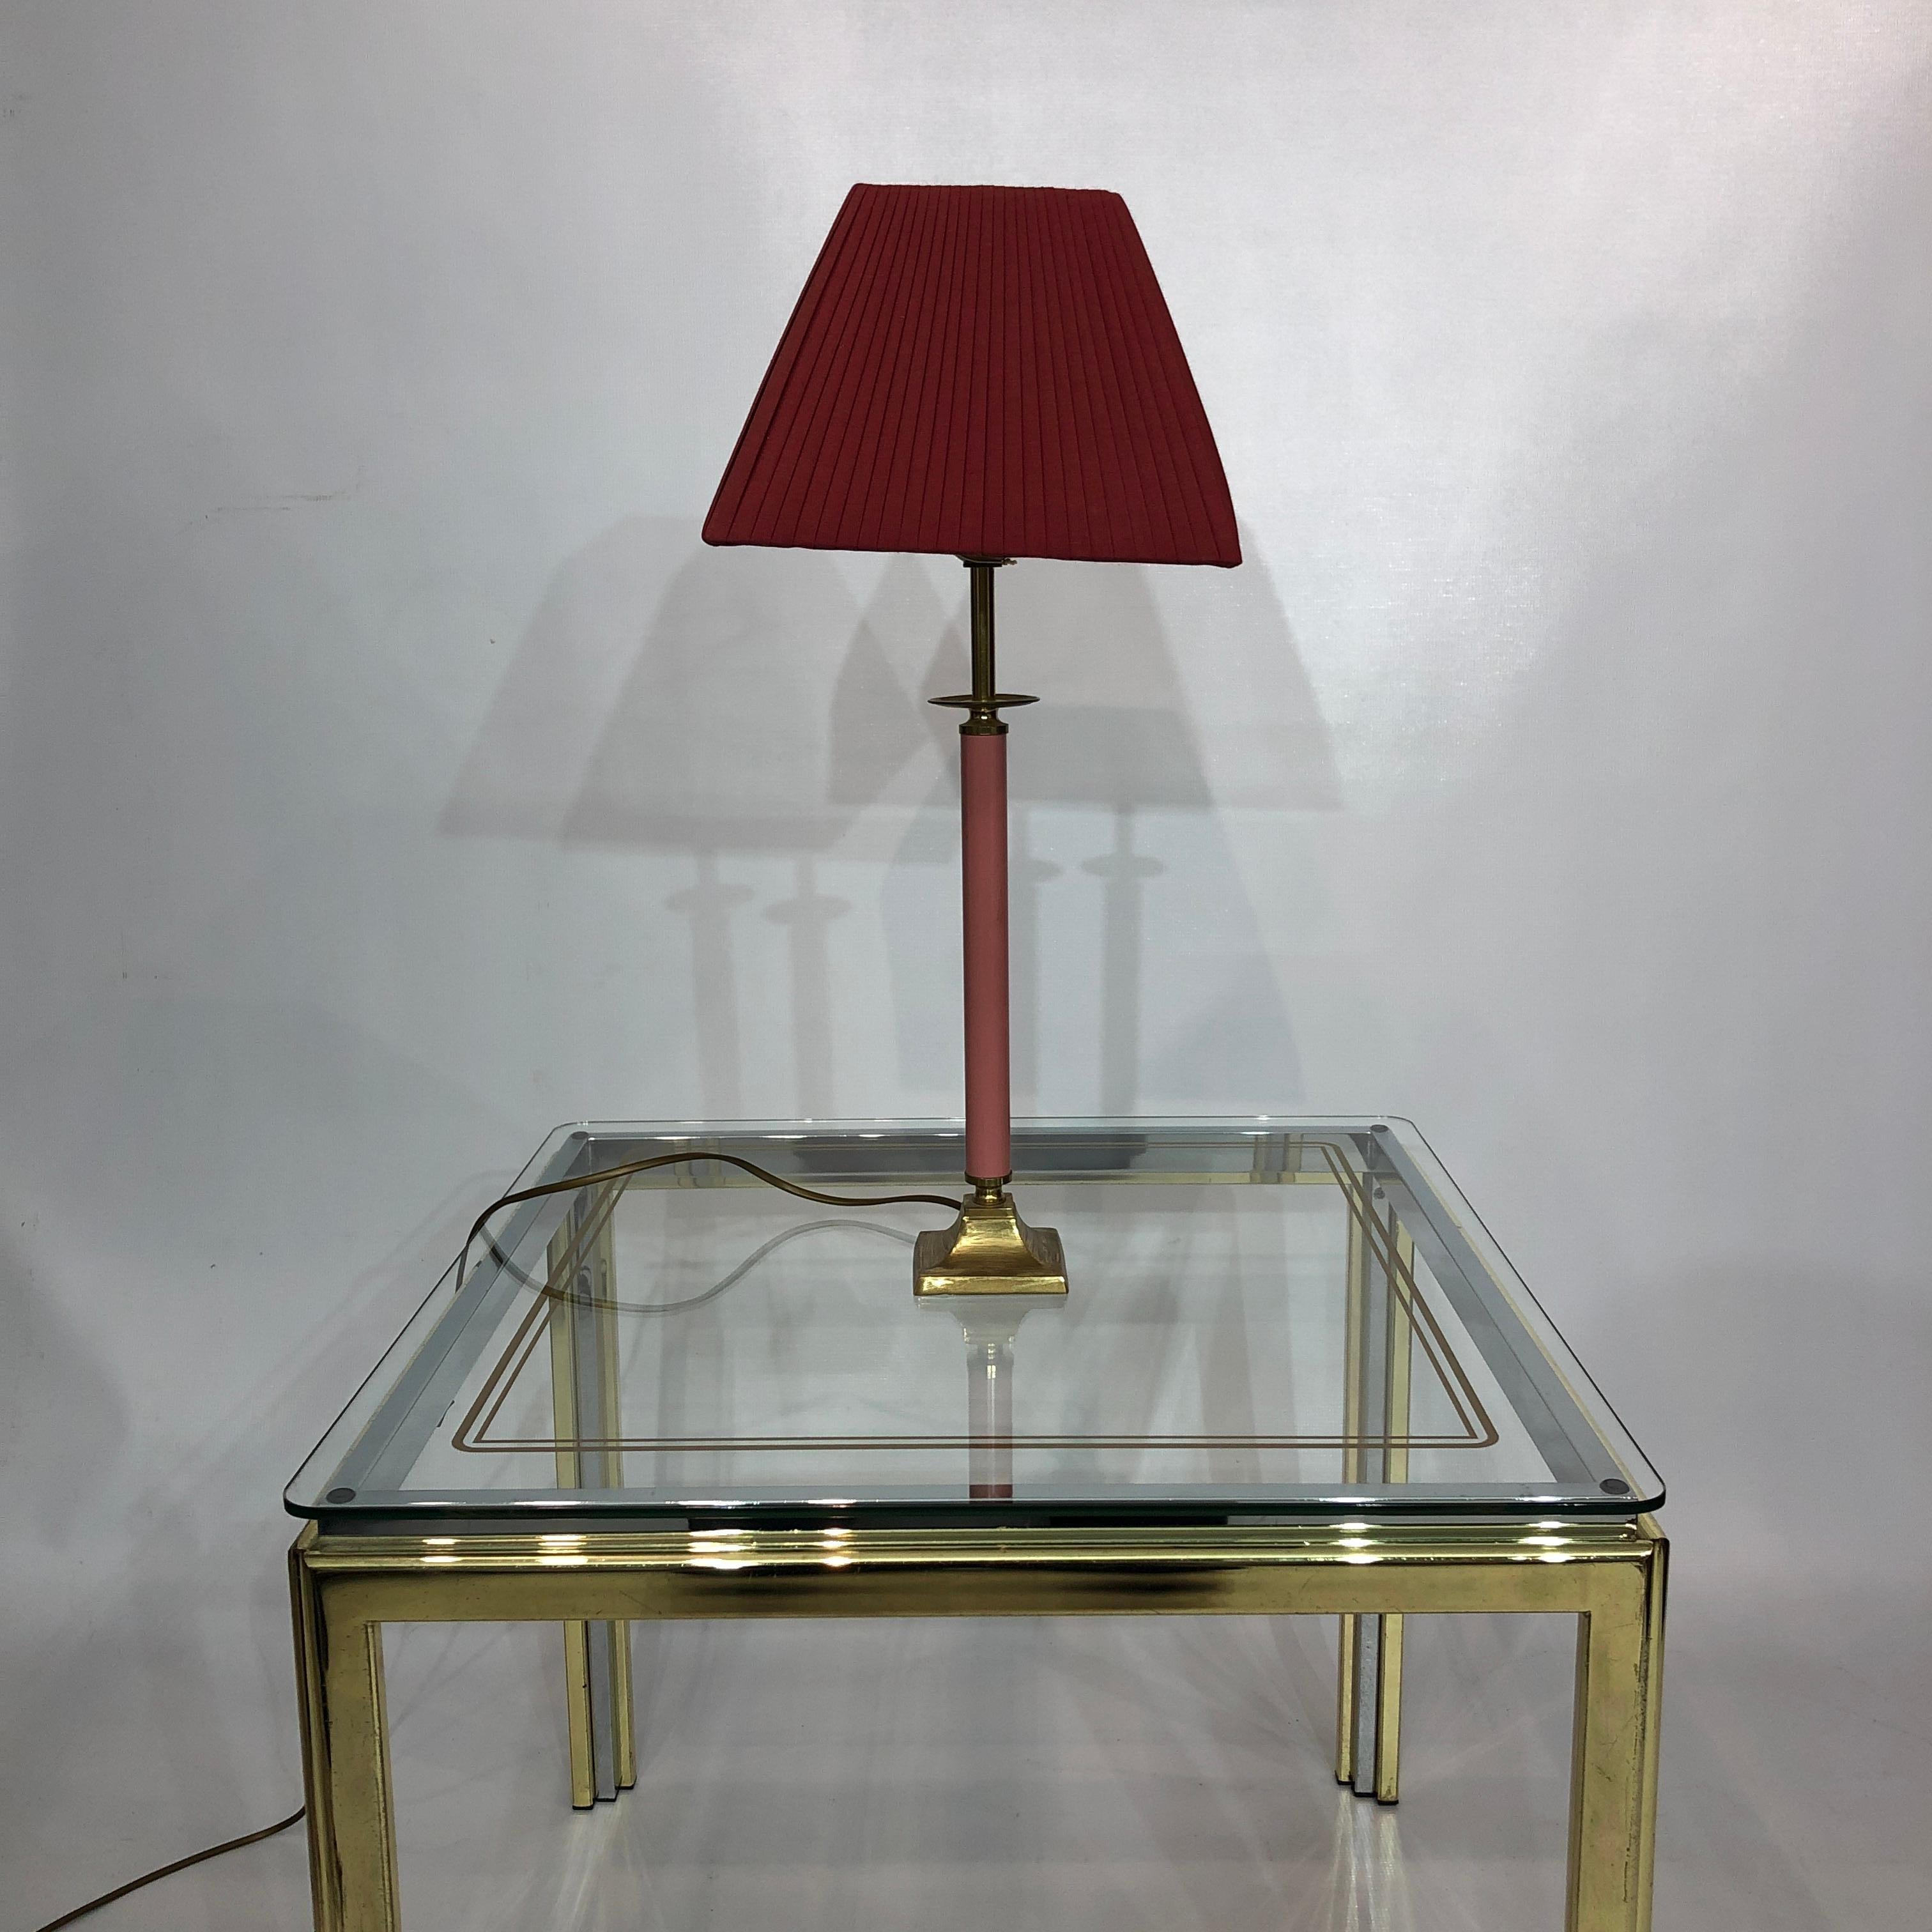 A lovely brass and millennial pink pastel enamel table lamp, with a burgundy pyramidal pleated lampshade. This piece would make a wonderful retro addition to any home either for a hallways, bedside table or kids room.

From a polished brass base